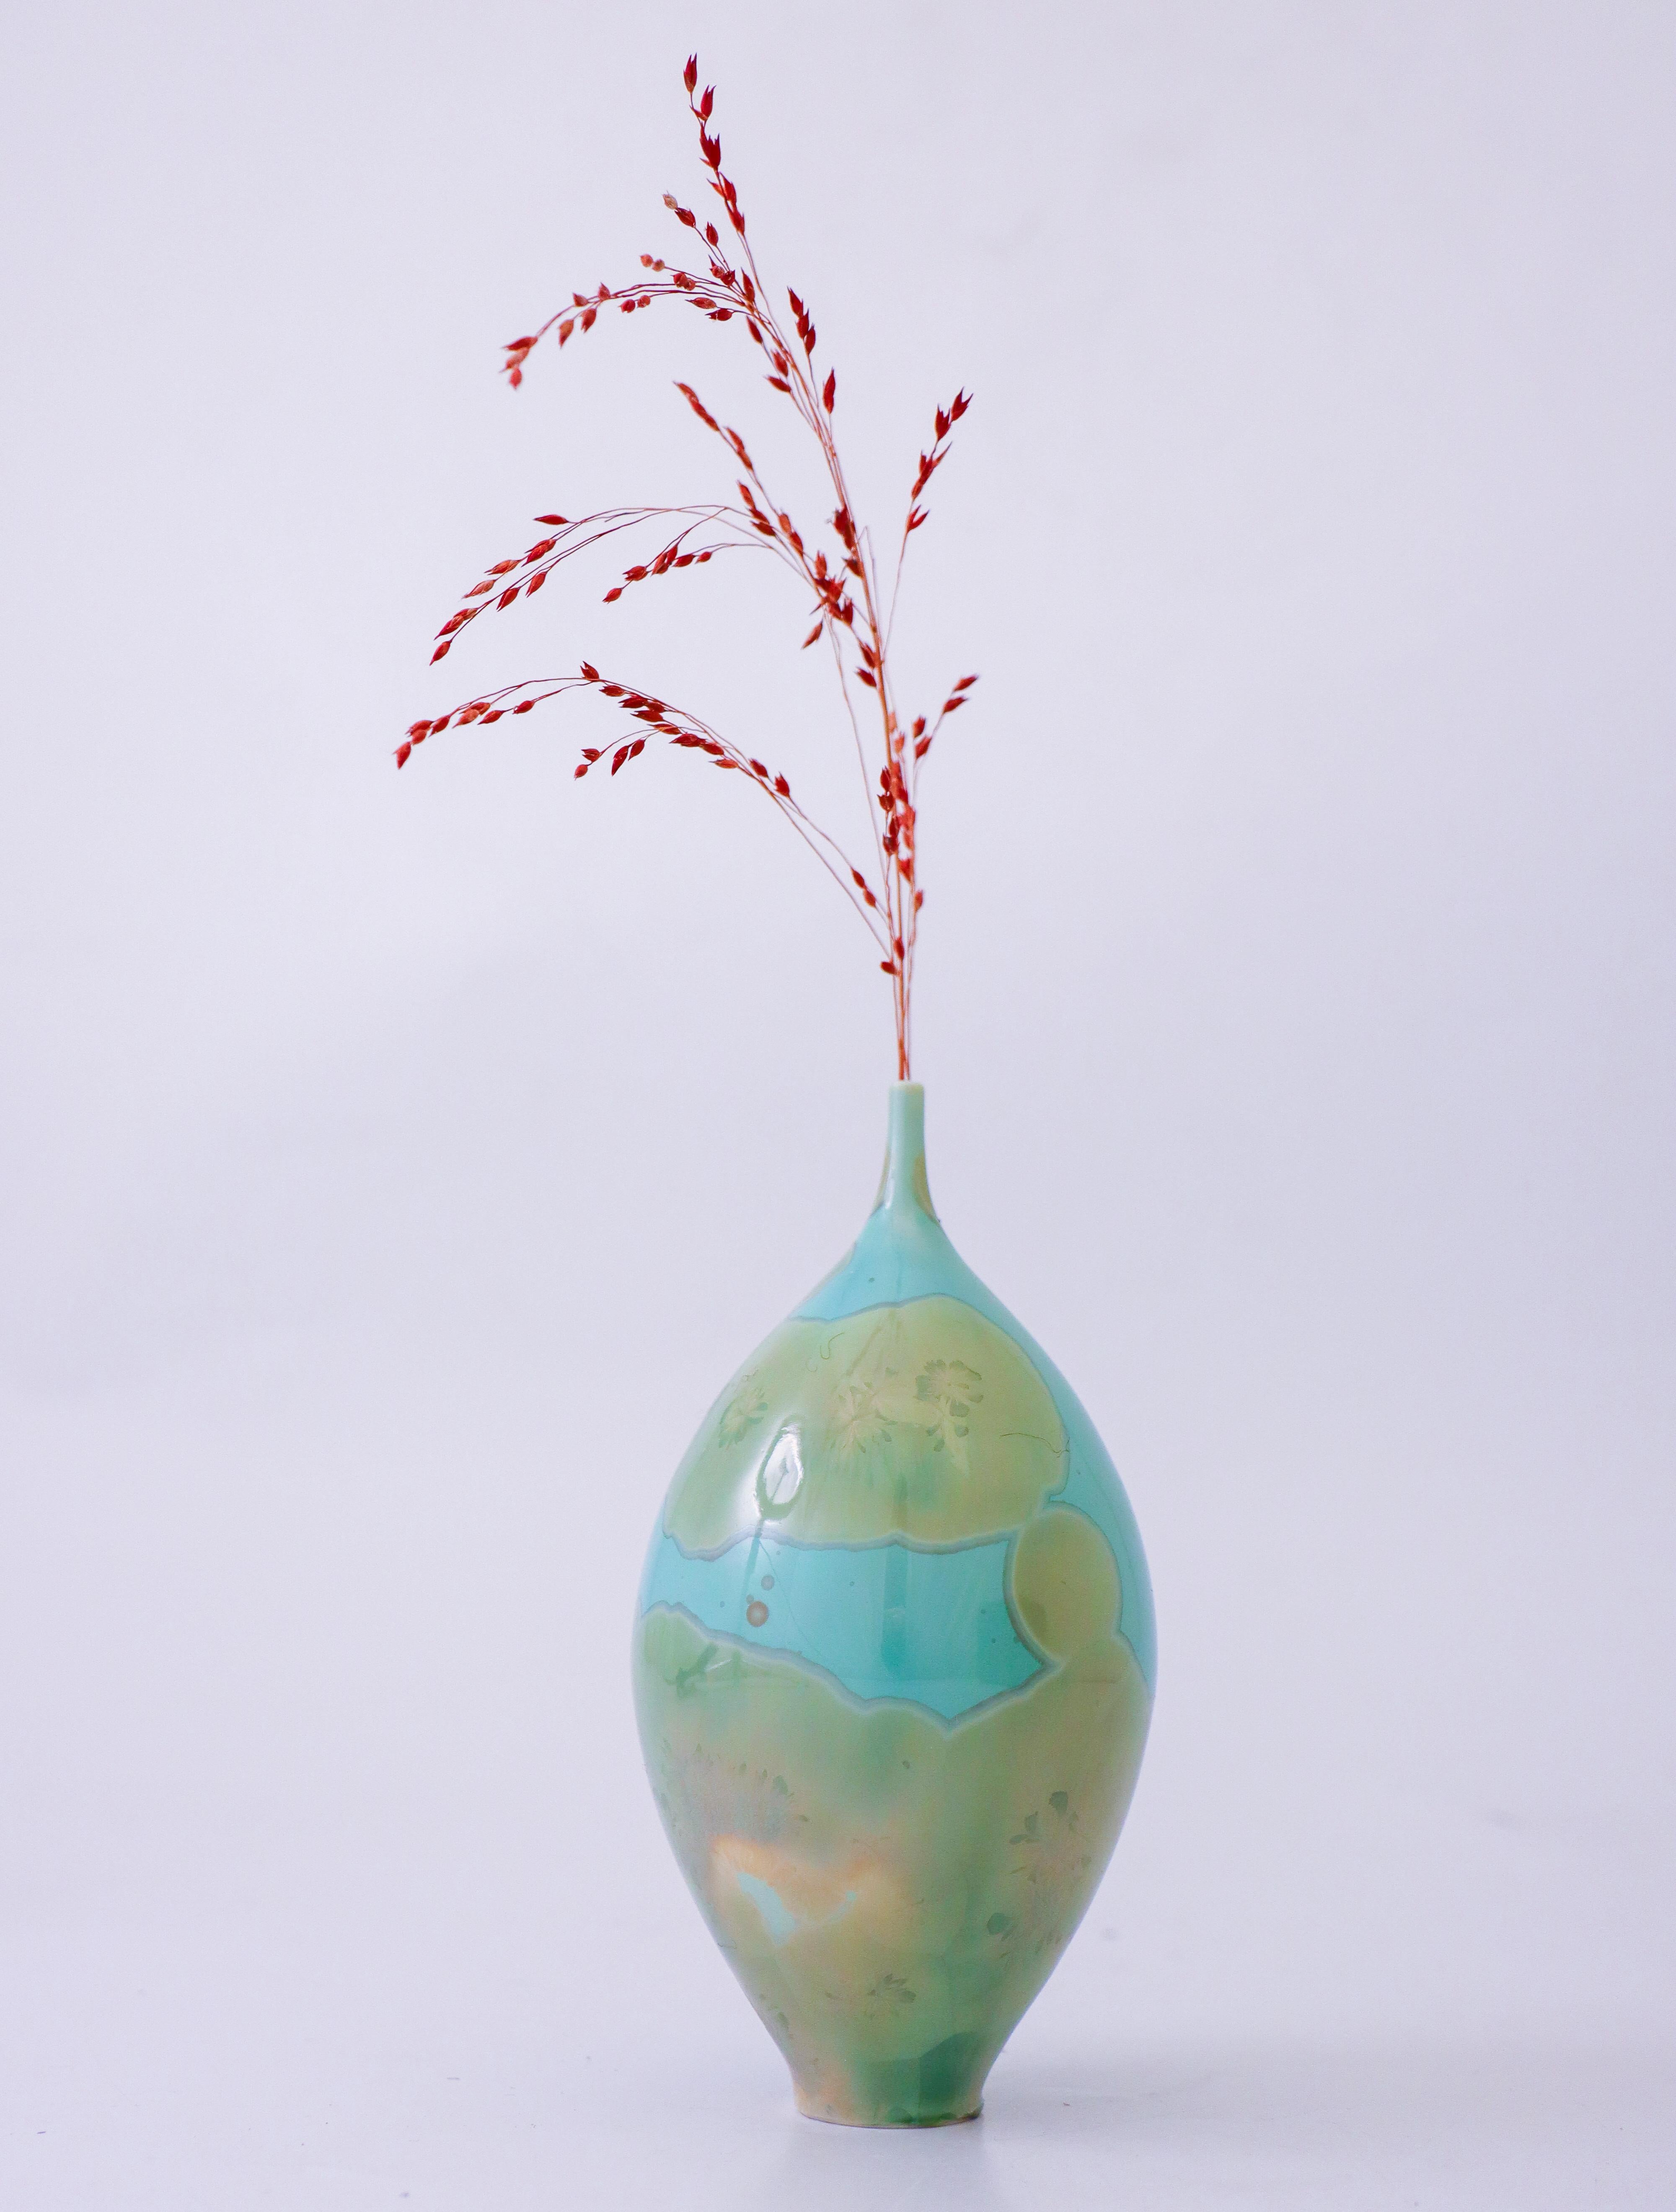 A beautiful turquoise vase with a green crystalline glaze designed by Isak Isaksson in Sweden. The vase is 14,5 cm (5.8